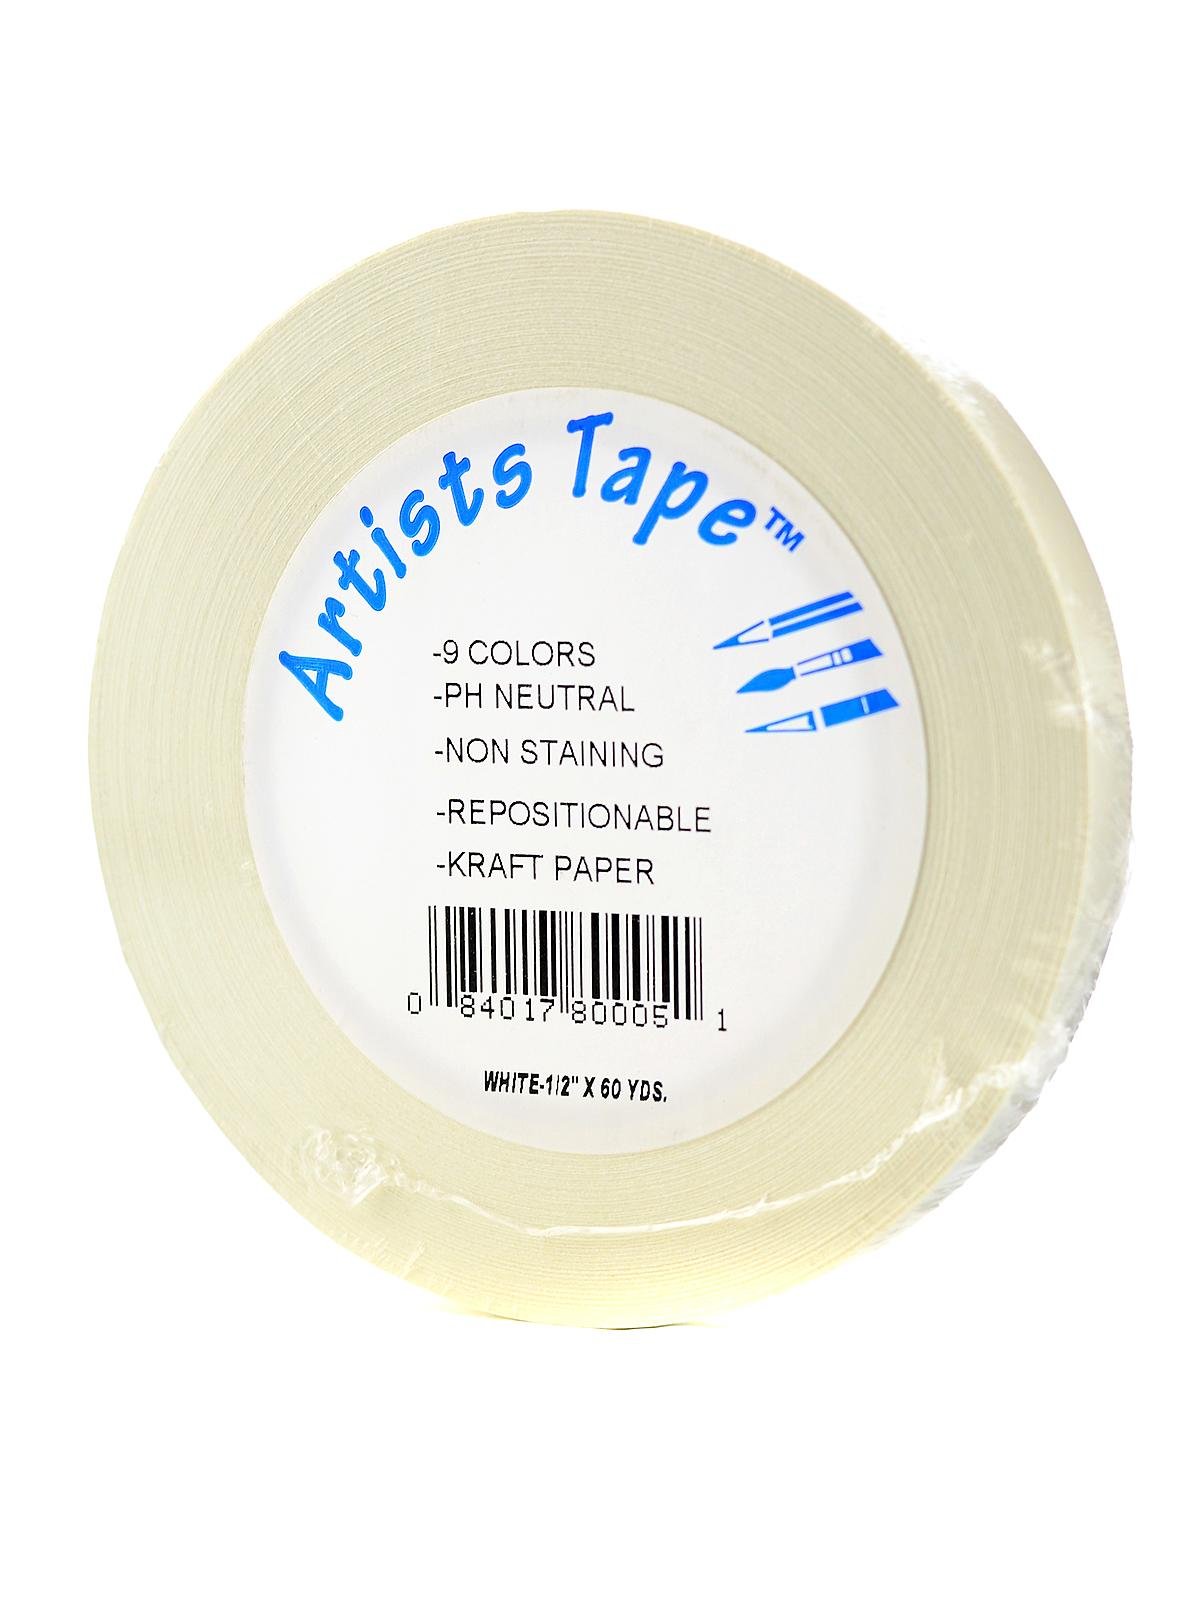  TSSART White Artist Tape Pro - Low Tack Masking Artists Tape  for Drafting Art Watercolor Painting and All Paper Media - Acid Free 1inch  Wide 180FT Long : Arts, Crafts & Sewing